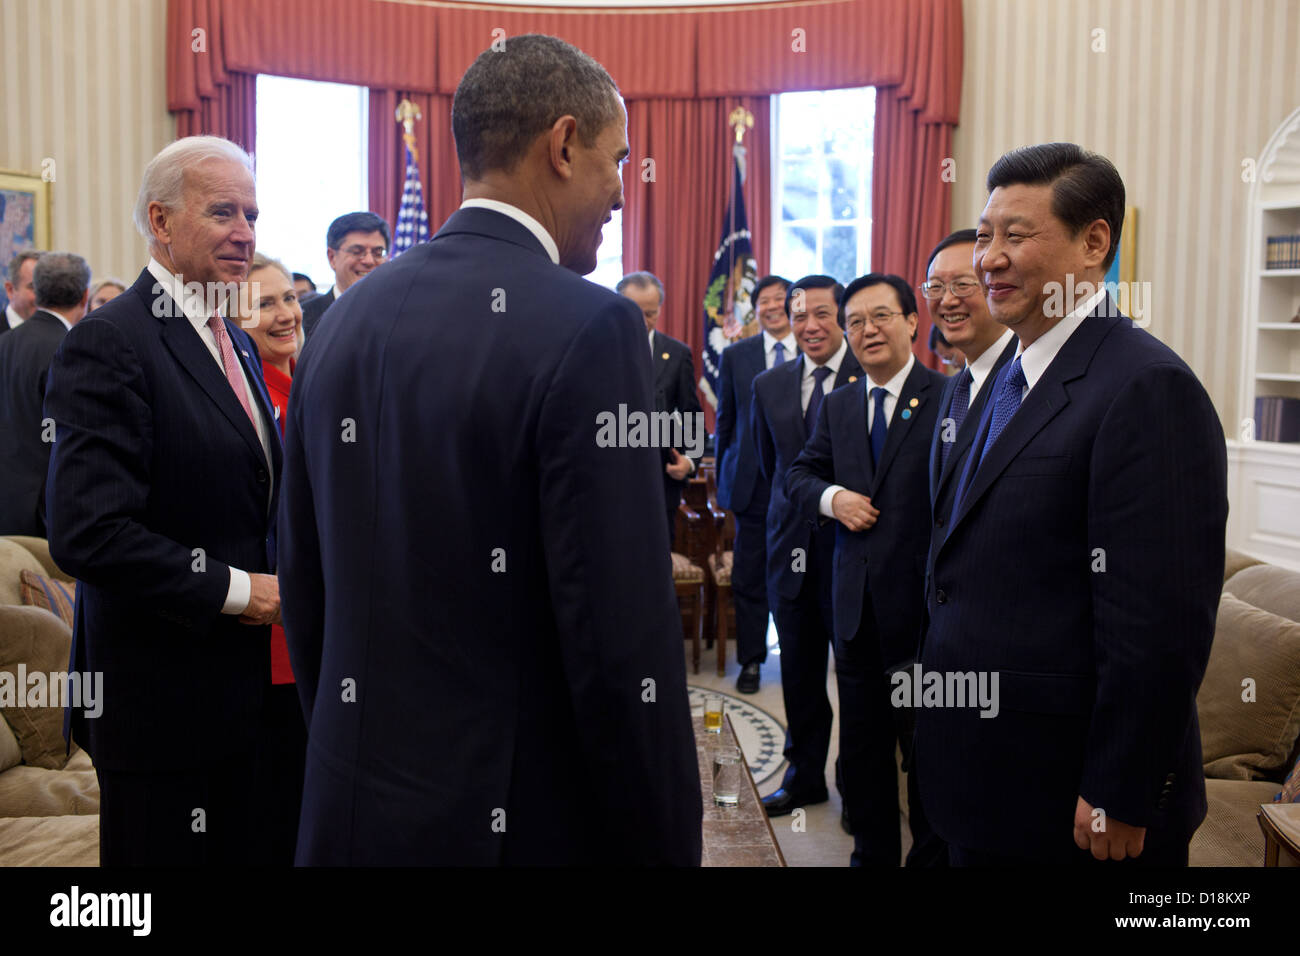 President Barack Obama and Vice President Joe Biden talk with Vice President Xi Jinping of the People’s Republic of China and Stock Photo